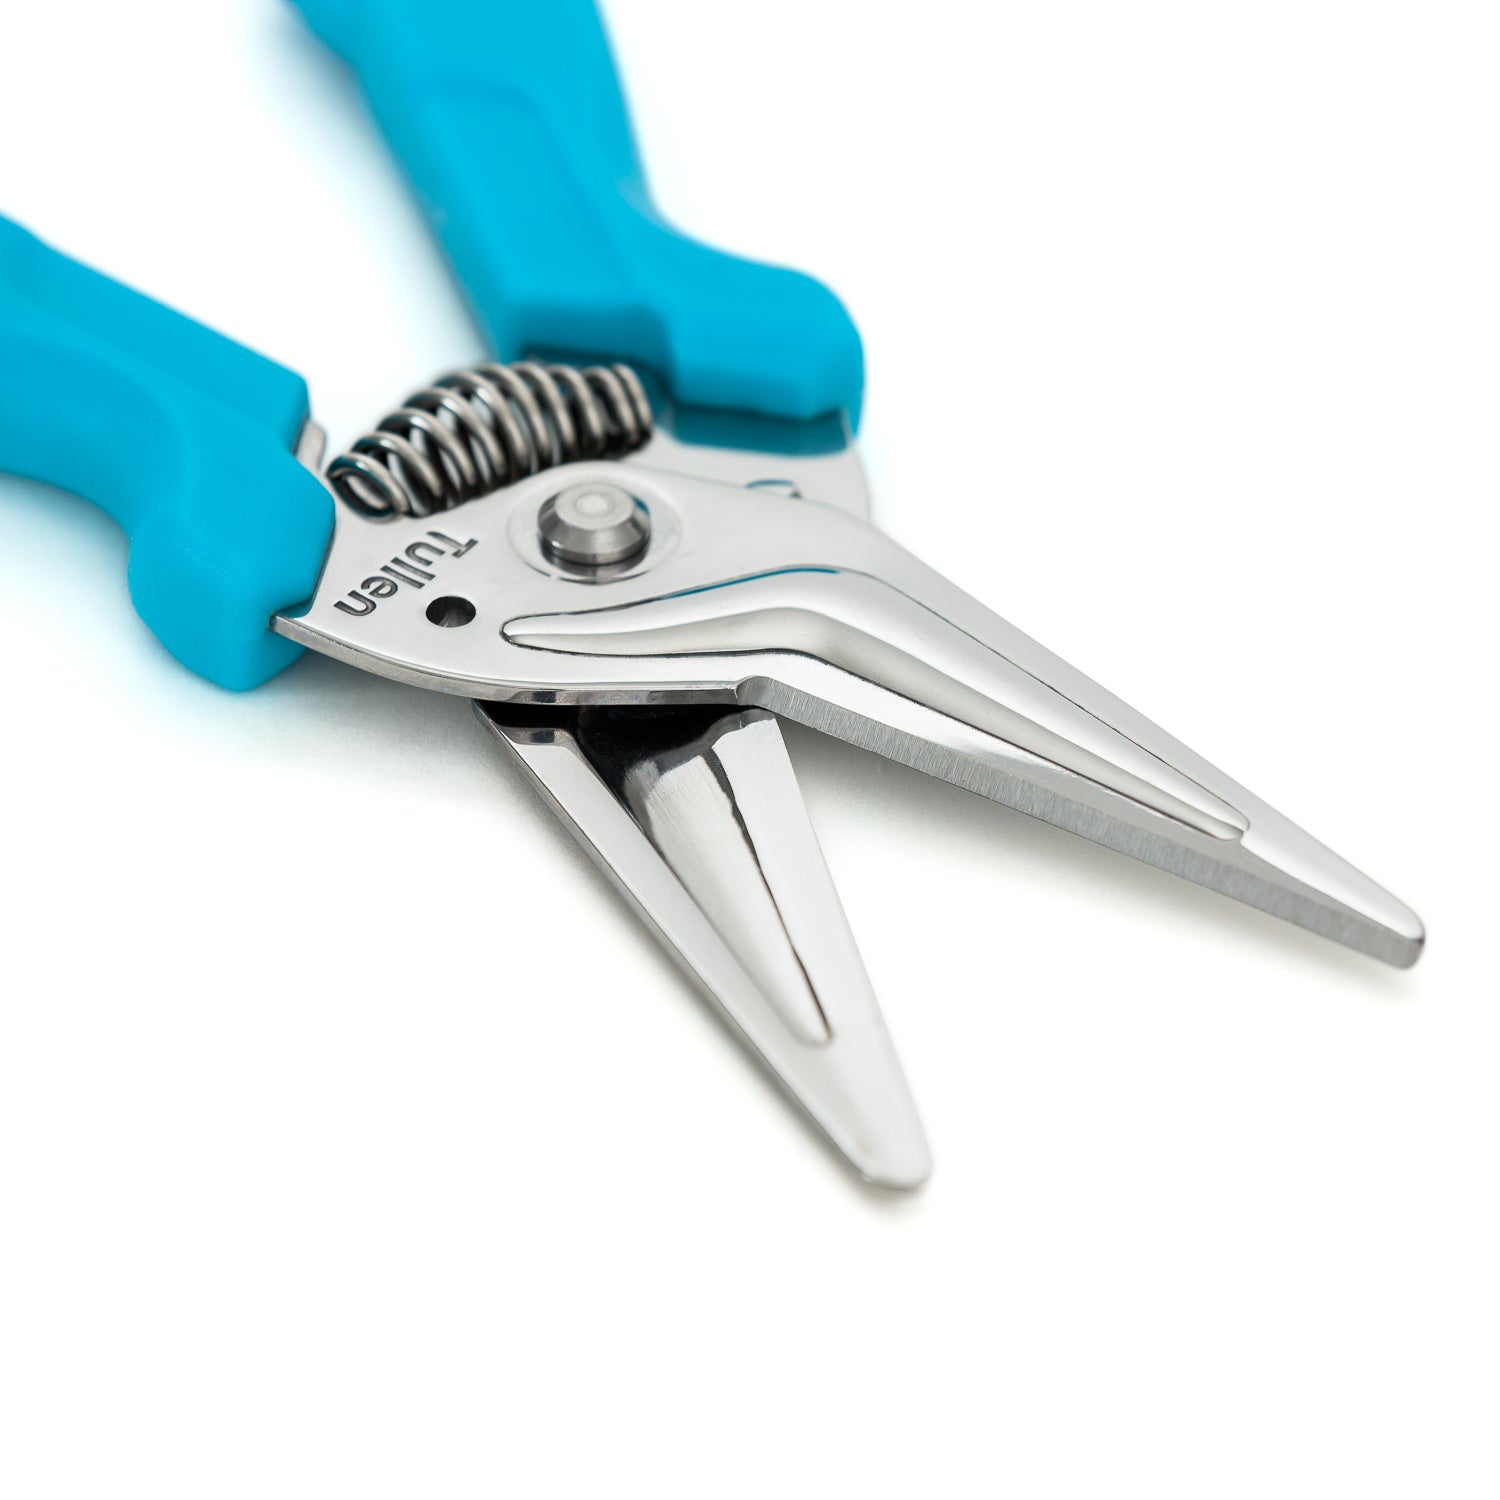 TULLEN tullen snips - cut virtually anything easily - shears for